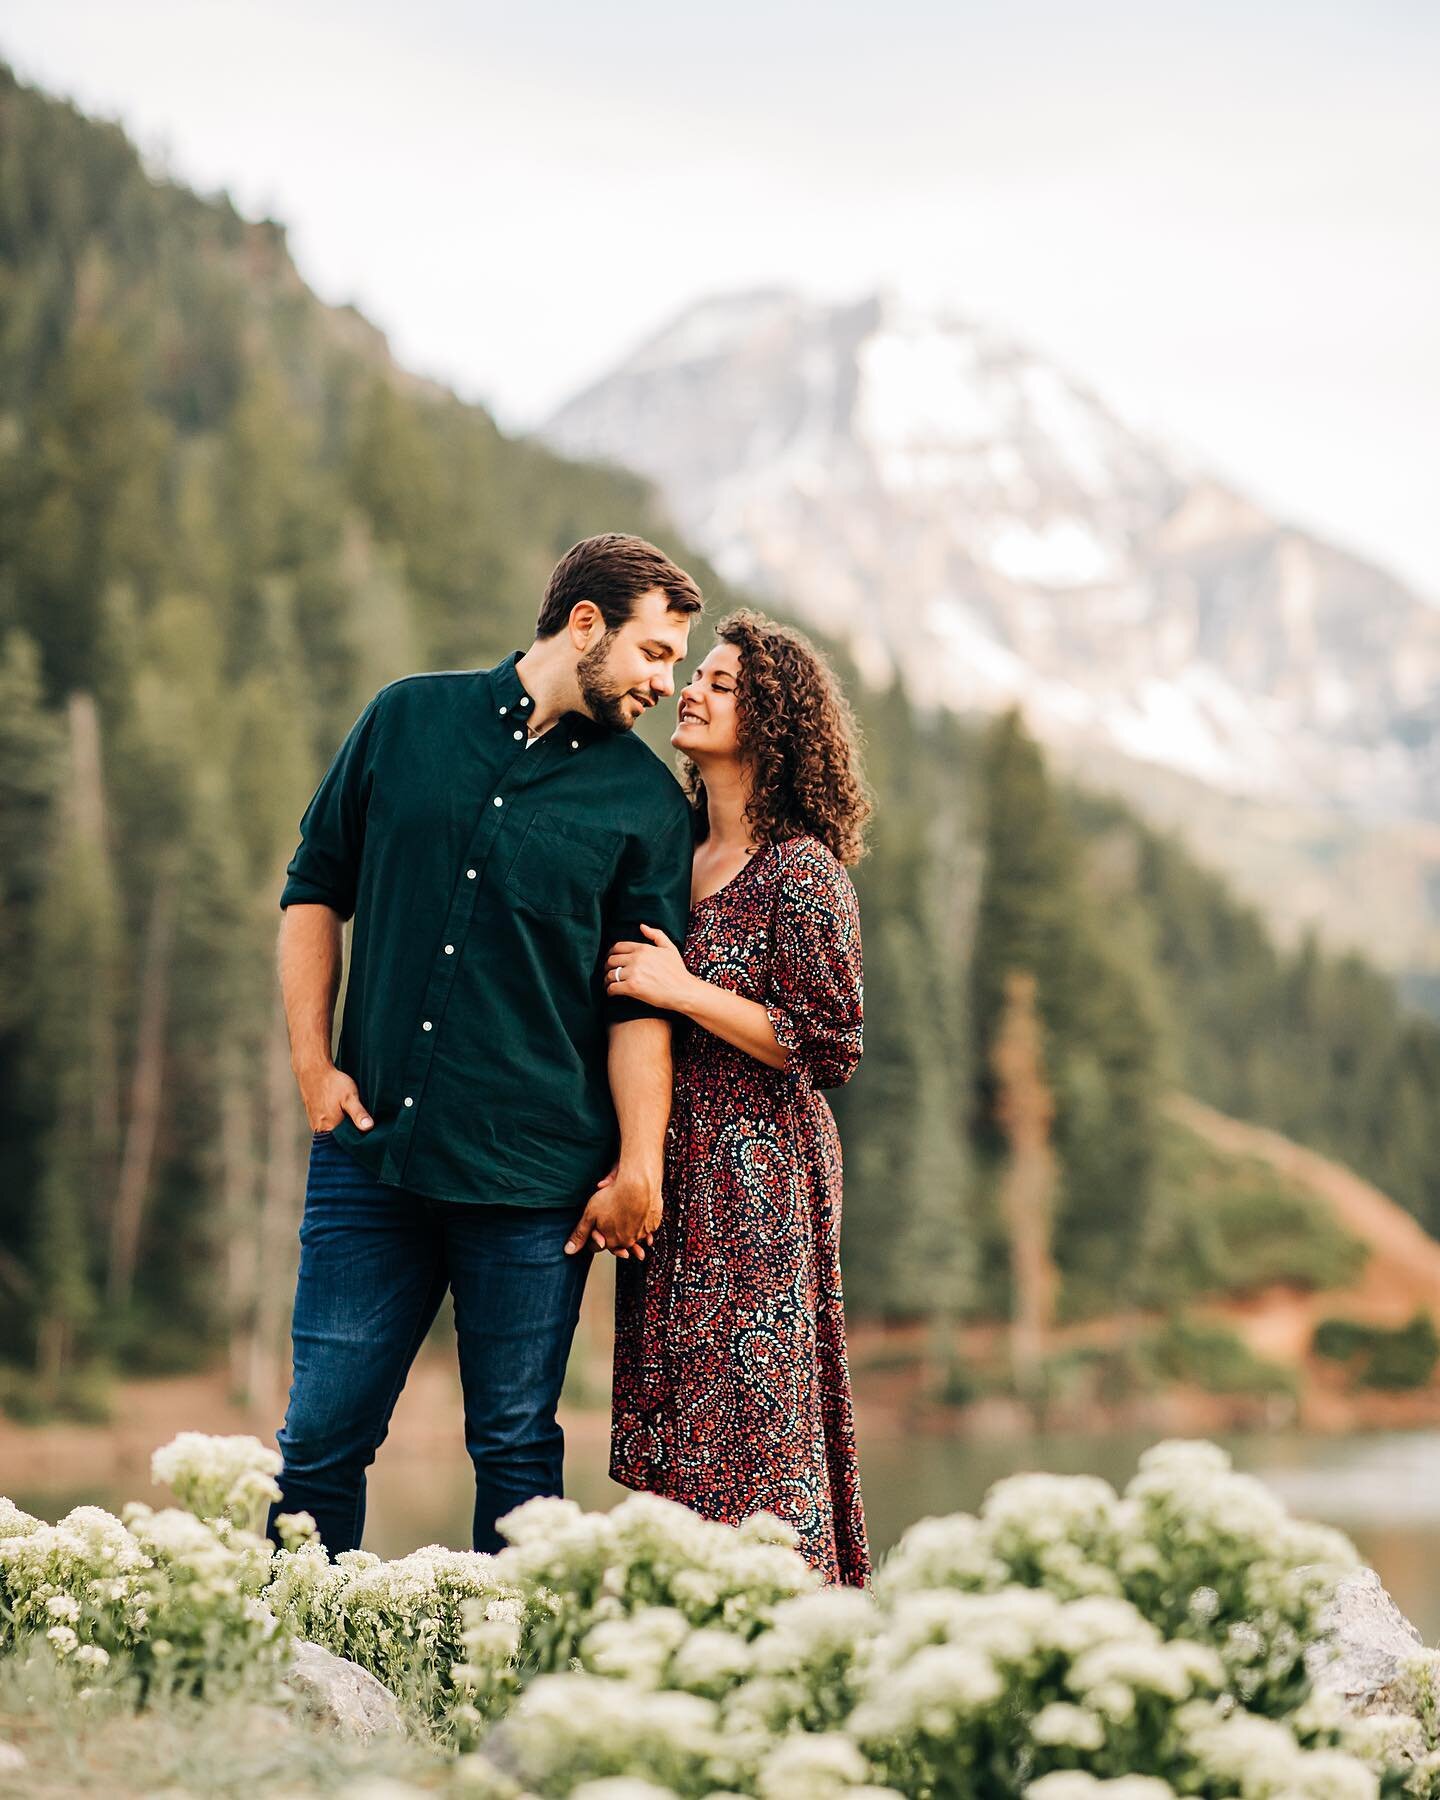 I know we need rain desperately, but these warm nights in the mountains are magical and I love them so much. 🤩
.
.
.
.
.
.
#utah #utahphotographer #utahphotography #utahwedding #utahweddingphotography #utahweddingphotographer #utahisrad #utahlove  #